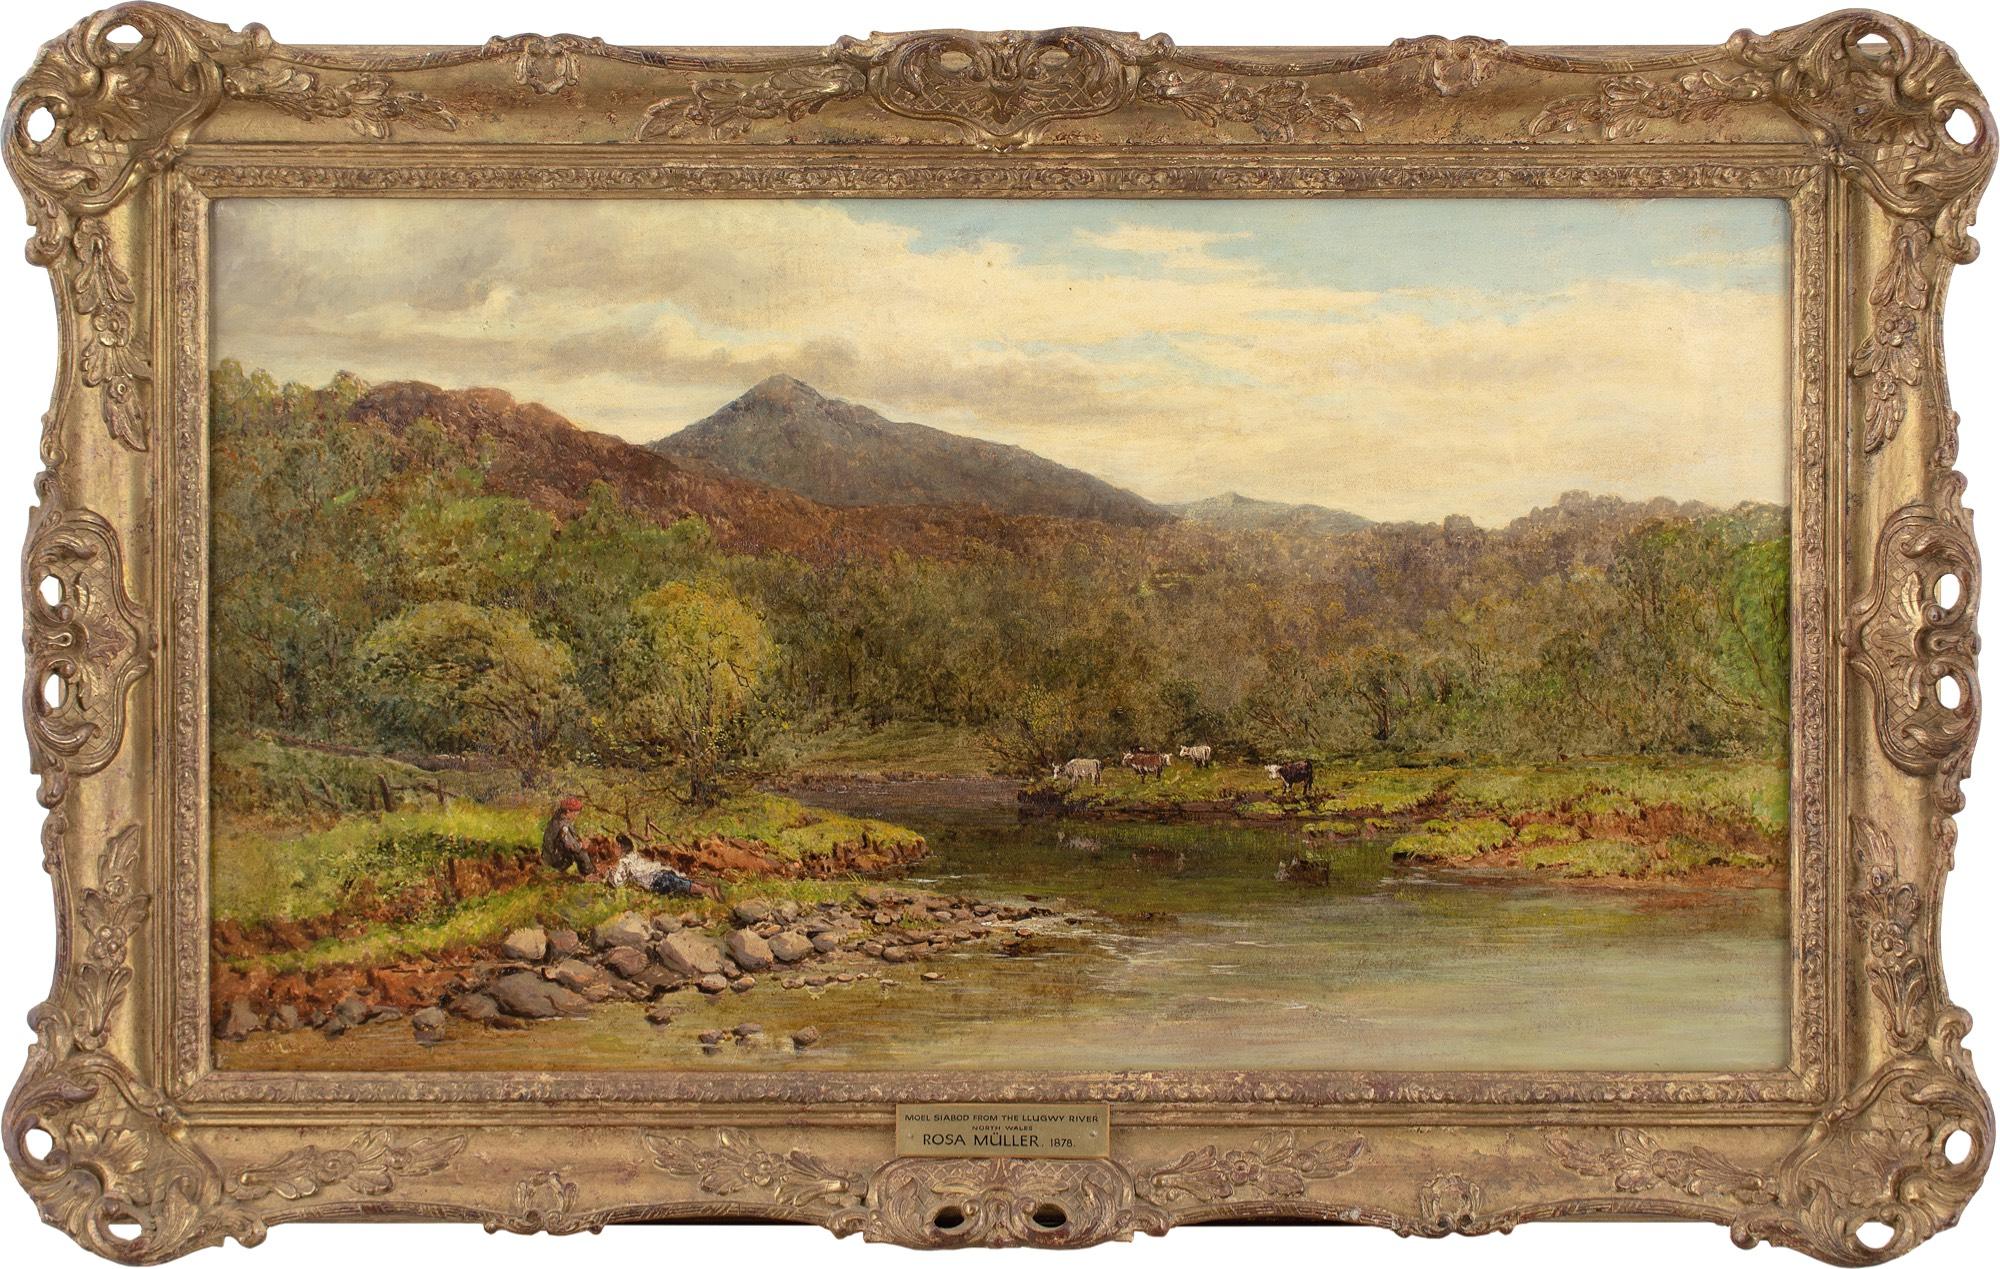 This late 19th-century oil painting by British artist Rosa Müller (1822-1914) depicts the Moel Siabod mountain in Snowdonia, from the winding River Llugwy. Two children play on the riverbank.

Rosa Müller was predominantly known for her naturalistic